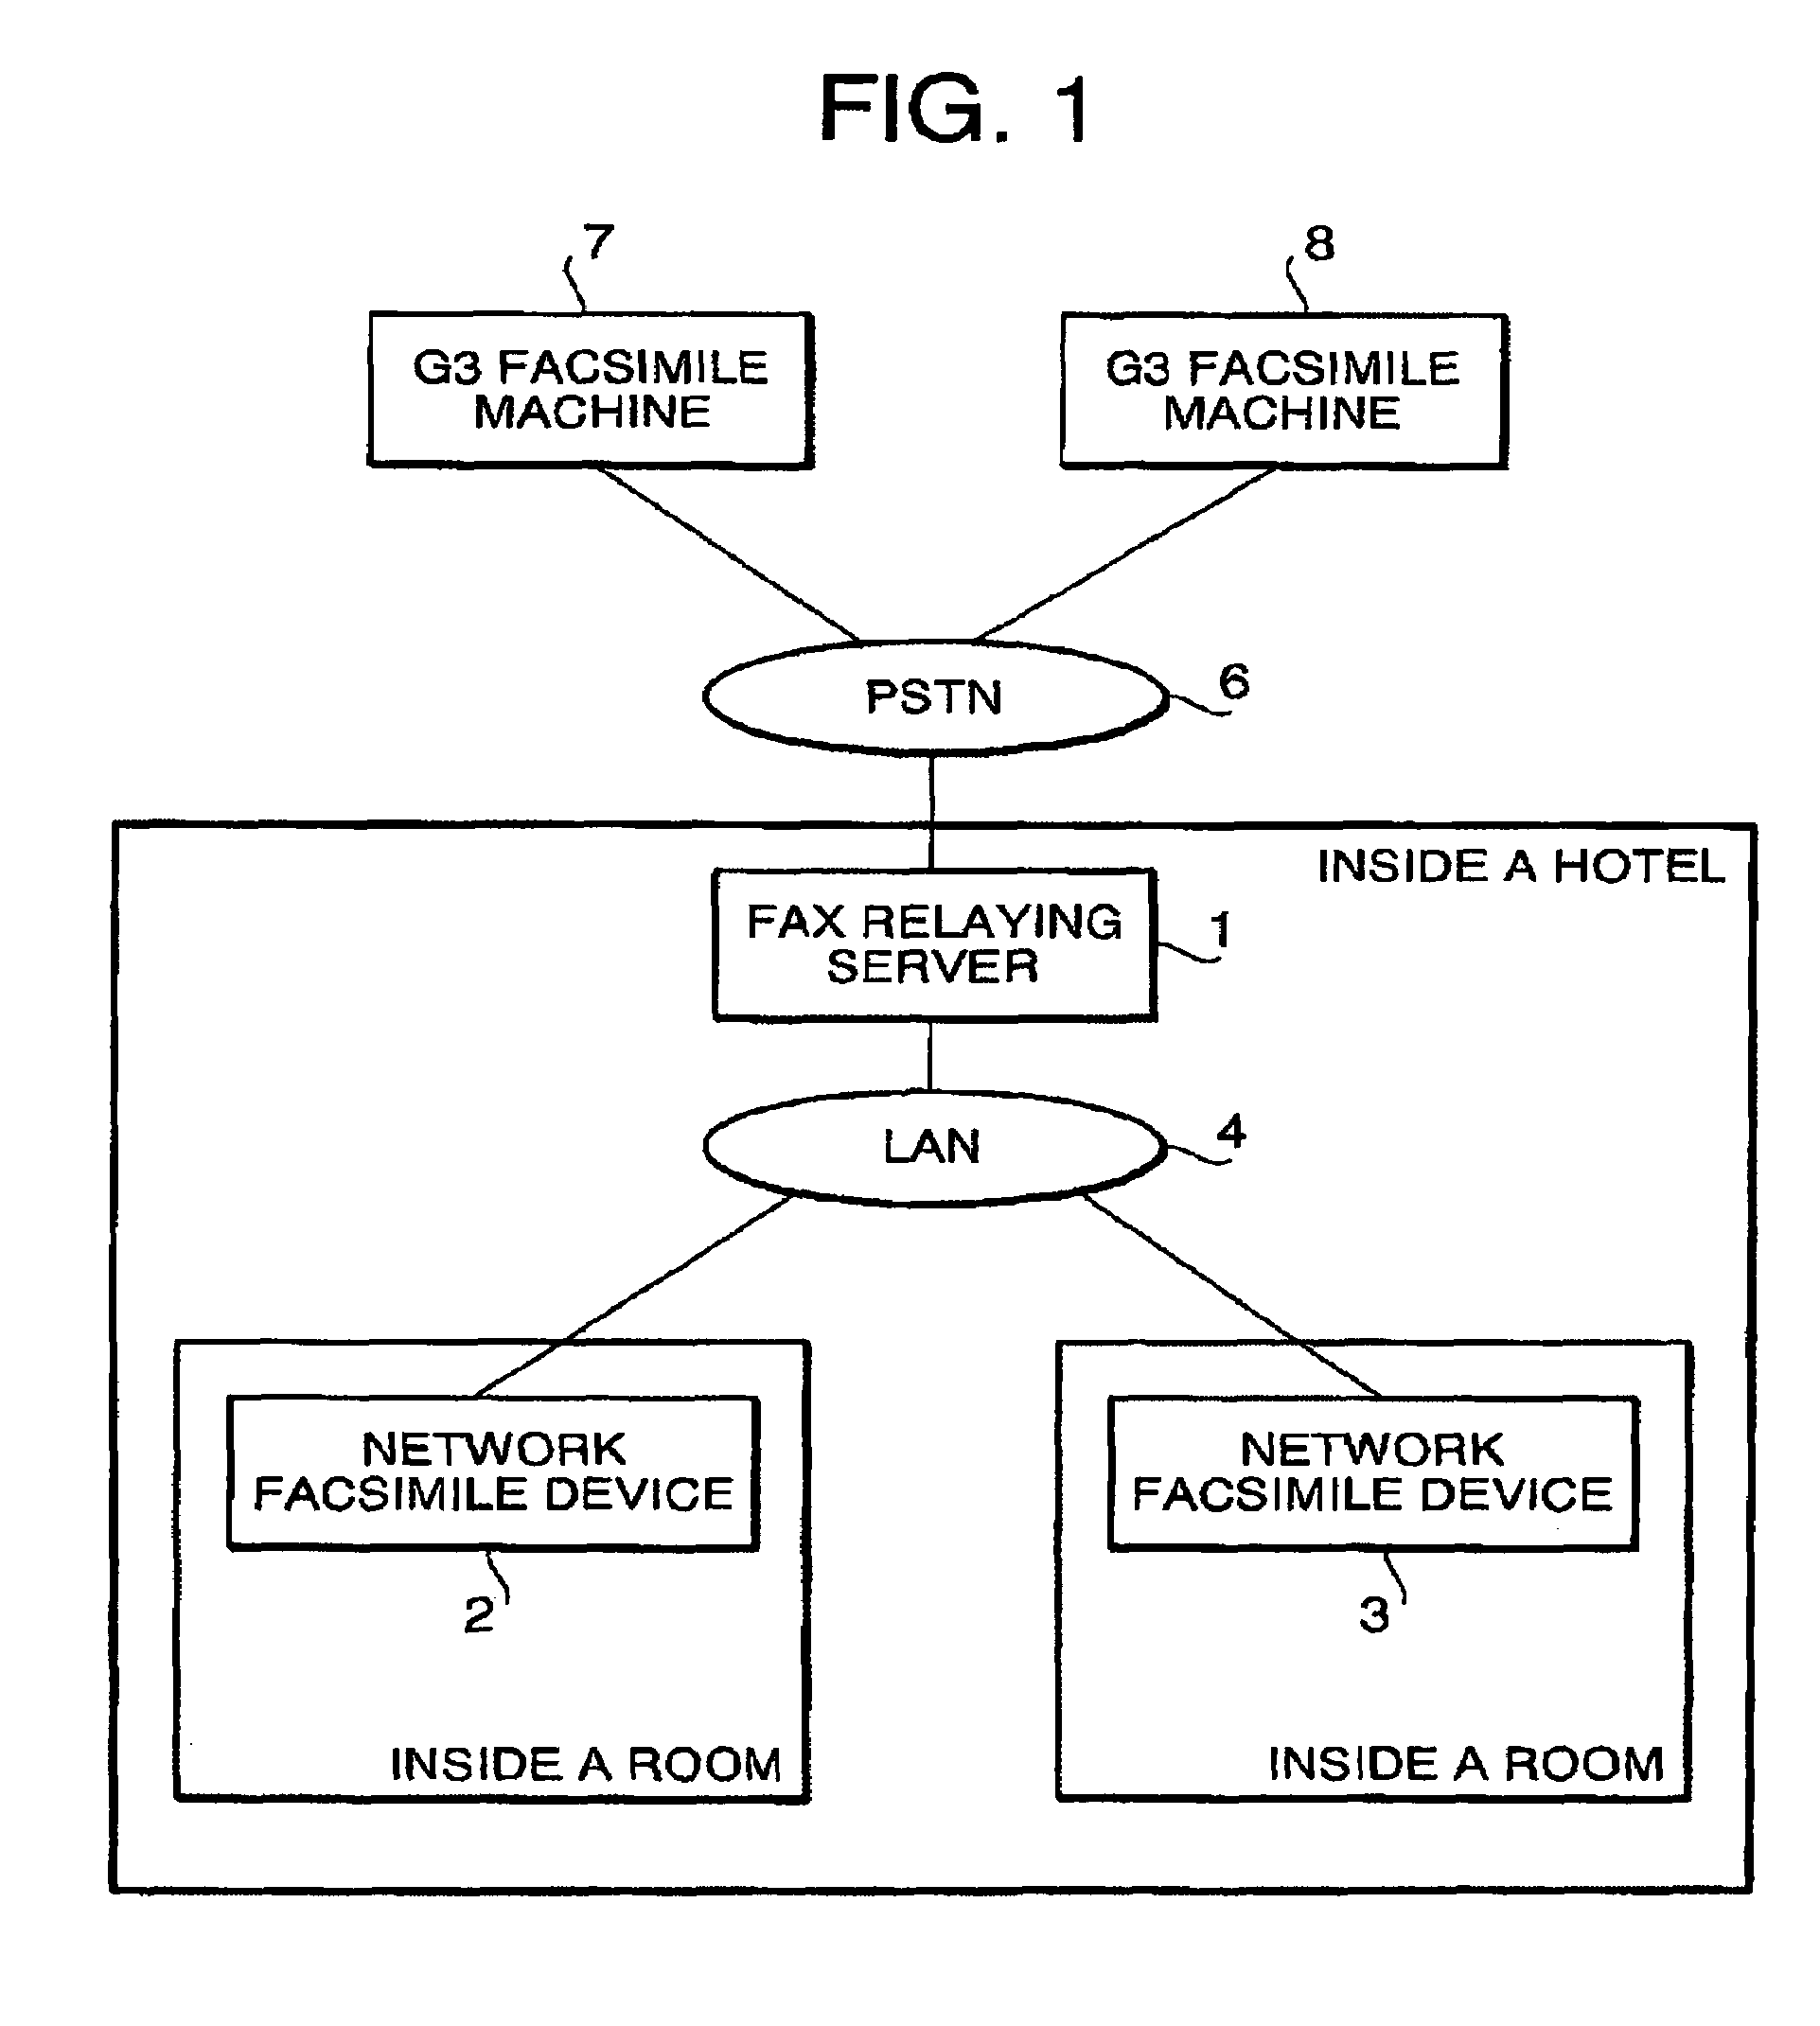 Network facsimile system with relaying server